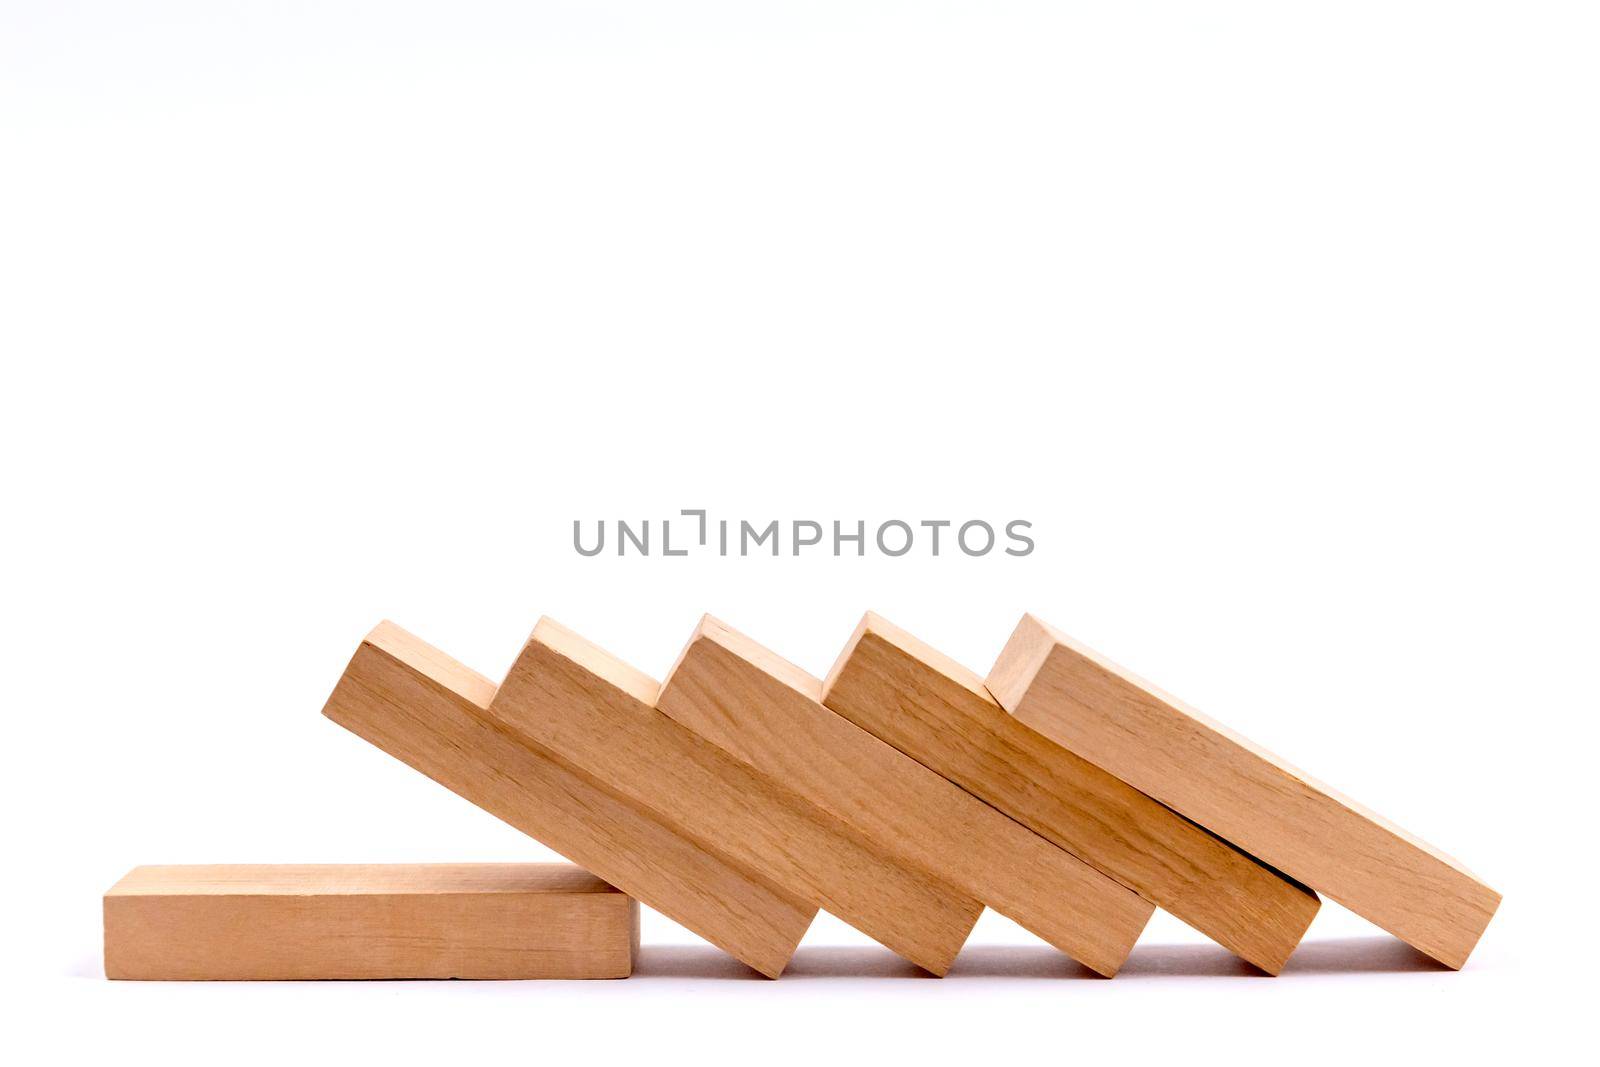 Wood block stacking as step stair, Business concept for growth success process